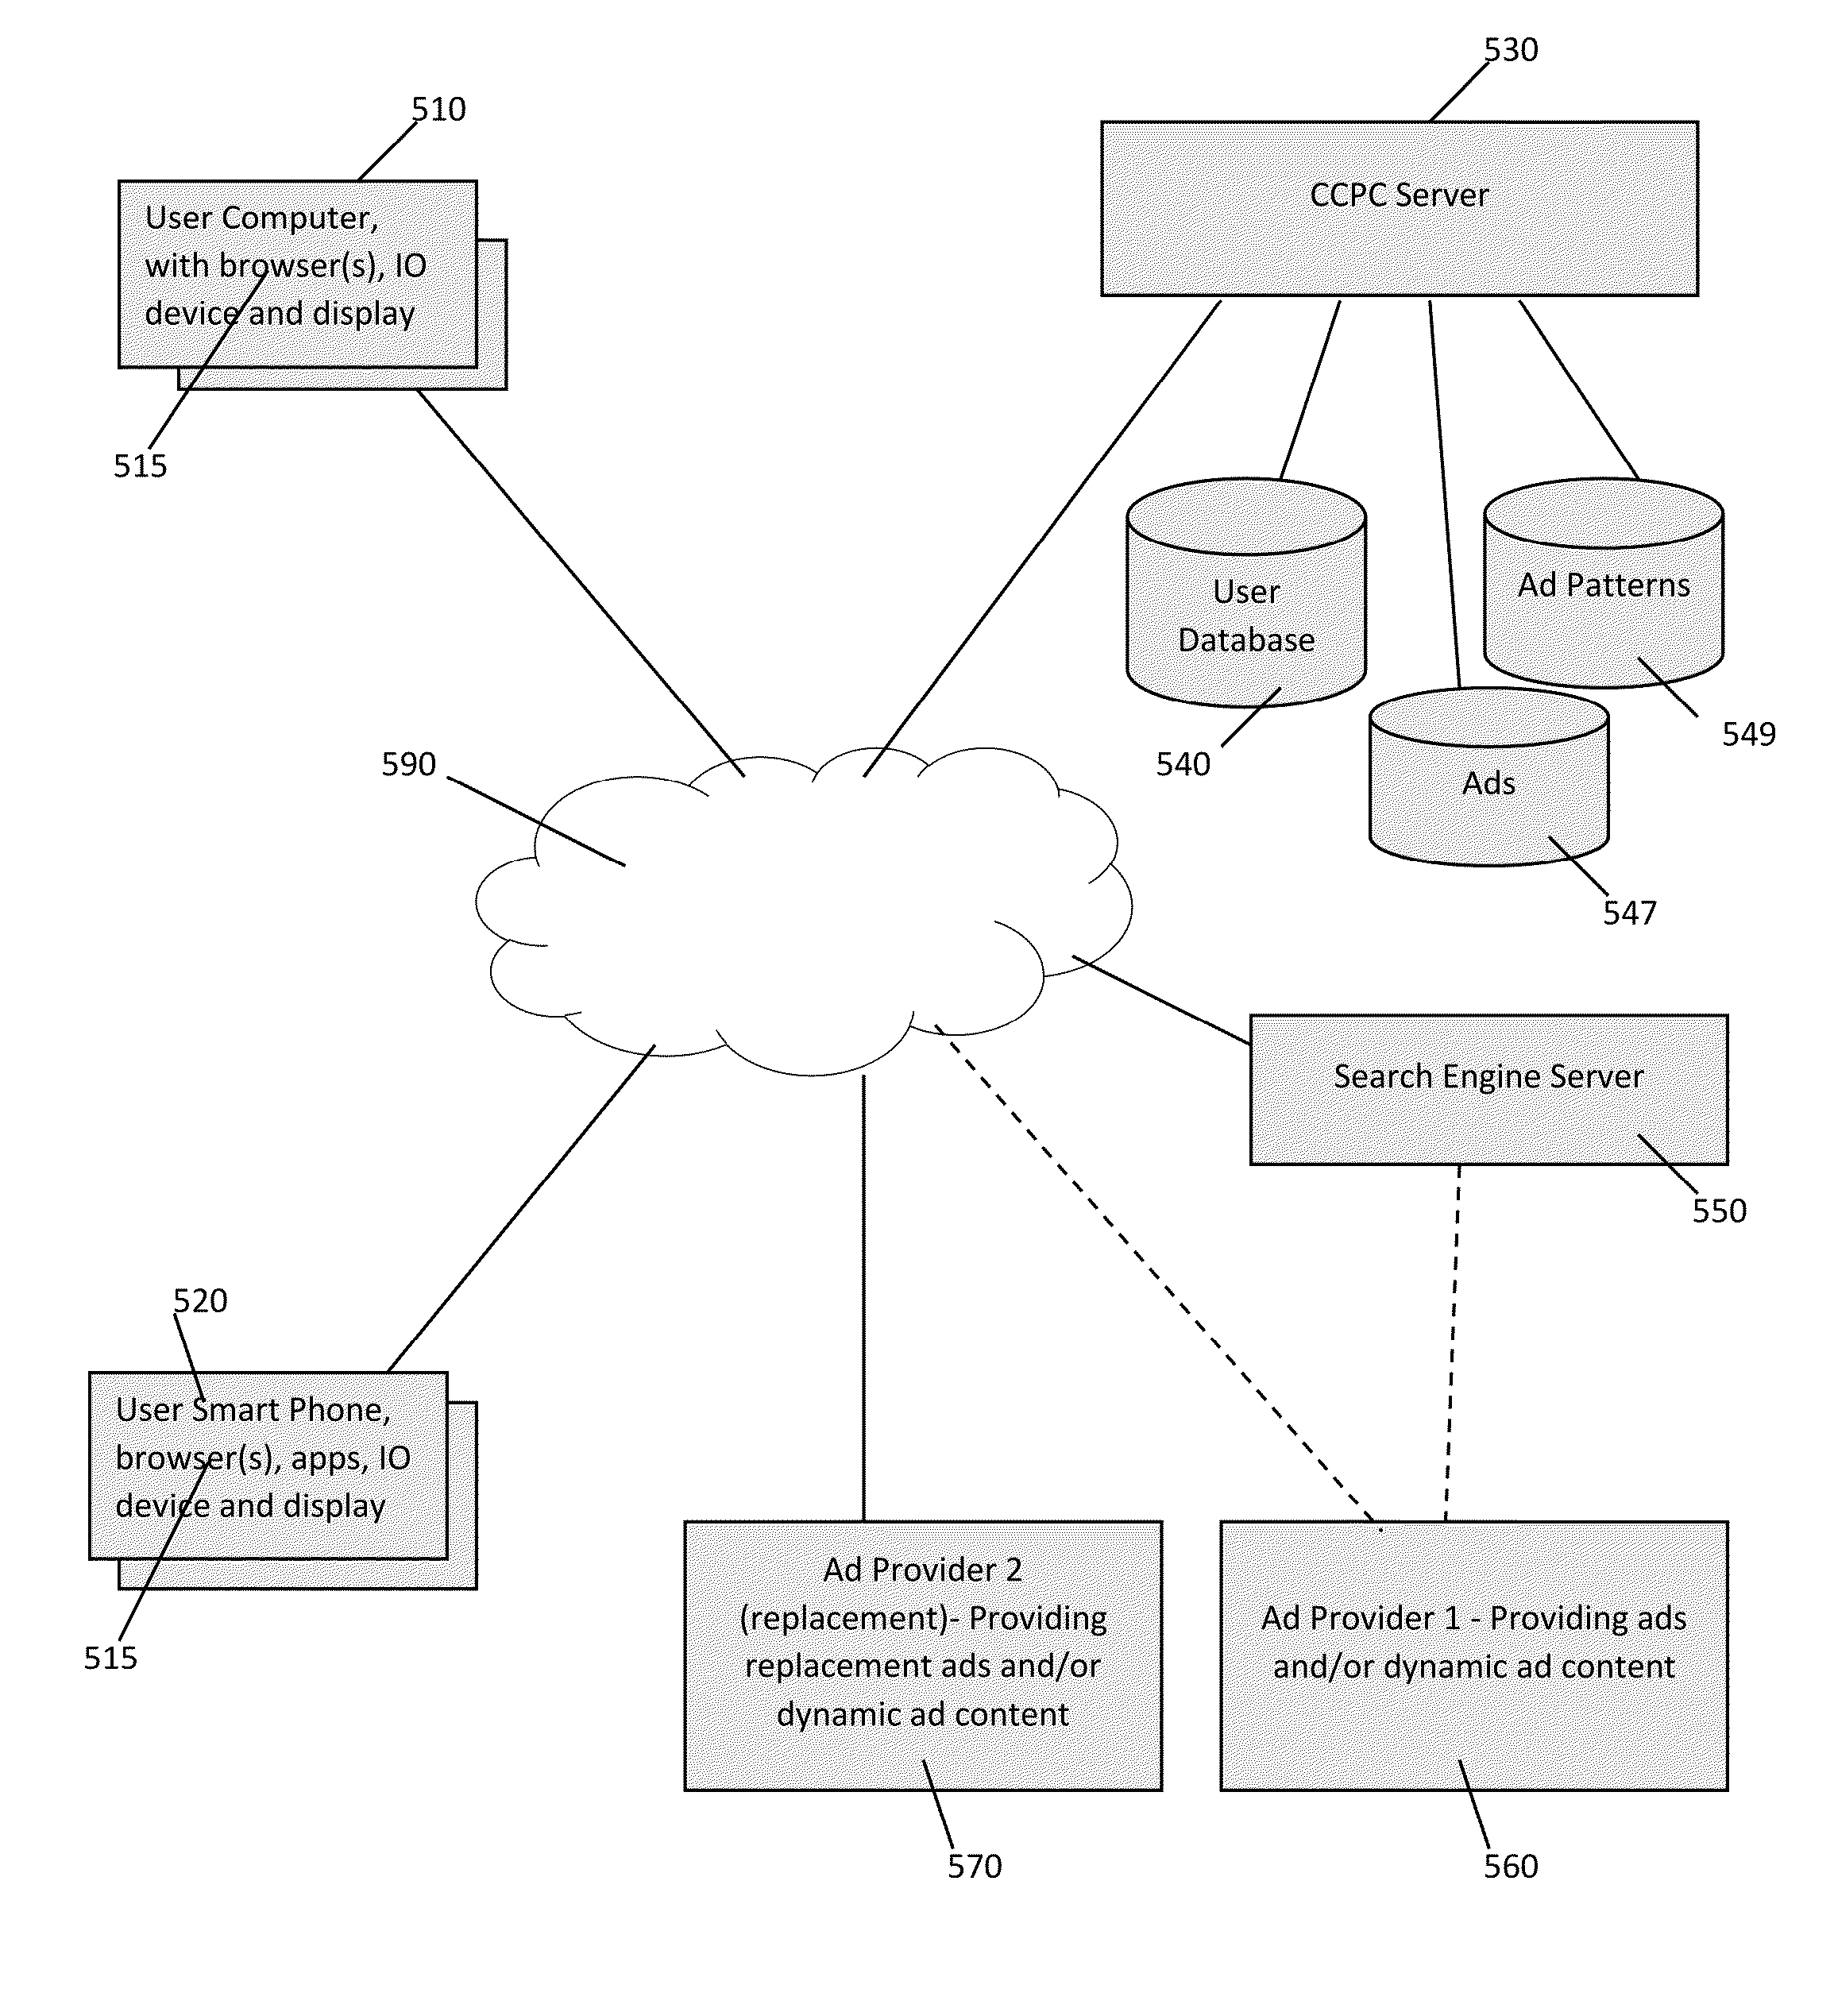 Apparatus, System and Method for a Commercial Content Provider Controller for Controlling Ad Content Provided with Web Page and Search Results